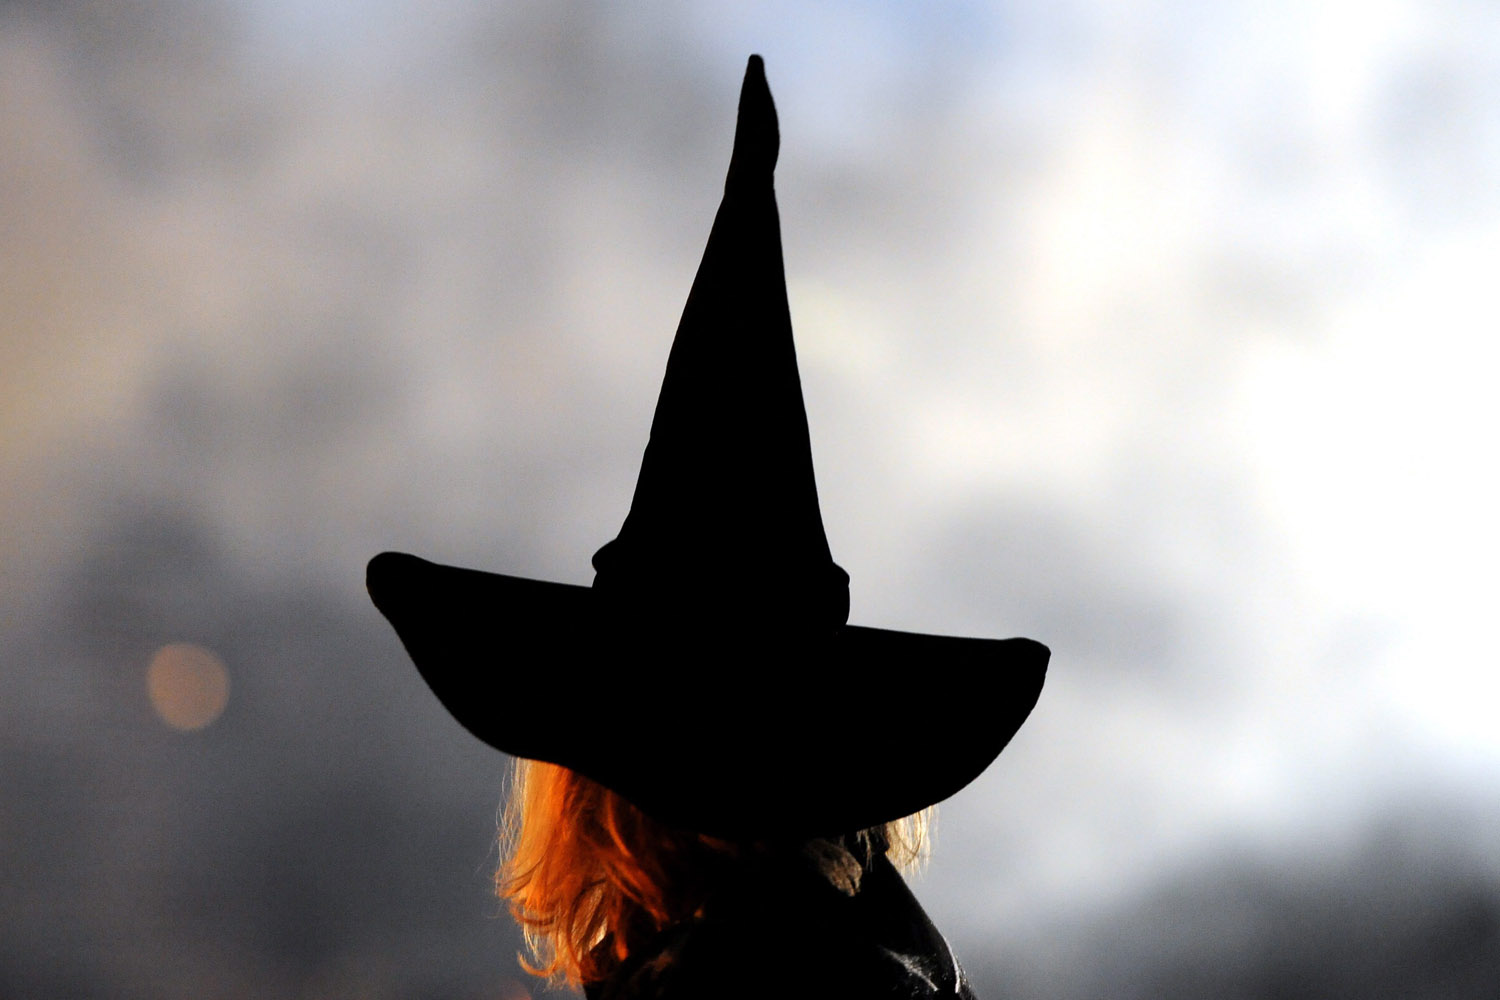 Image: Oct. 31, 2012. A woman wears a witch's hat at a Halloween party at the Tierpark zoo in Berlin.